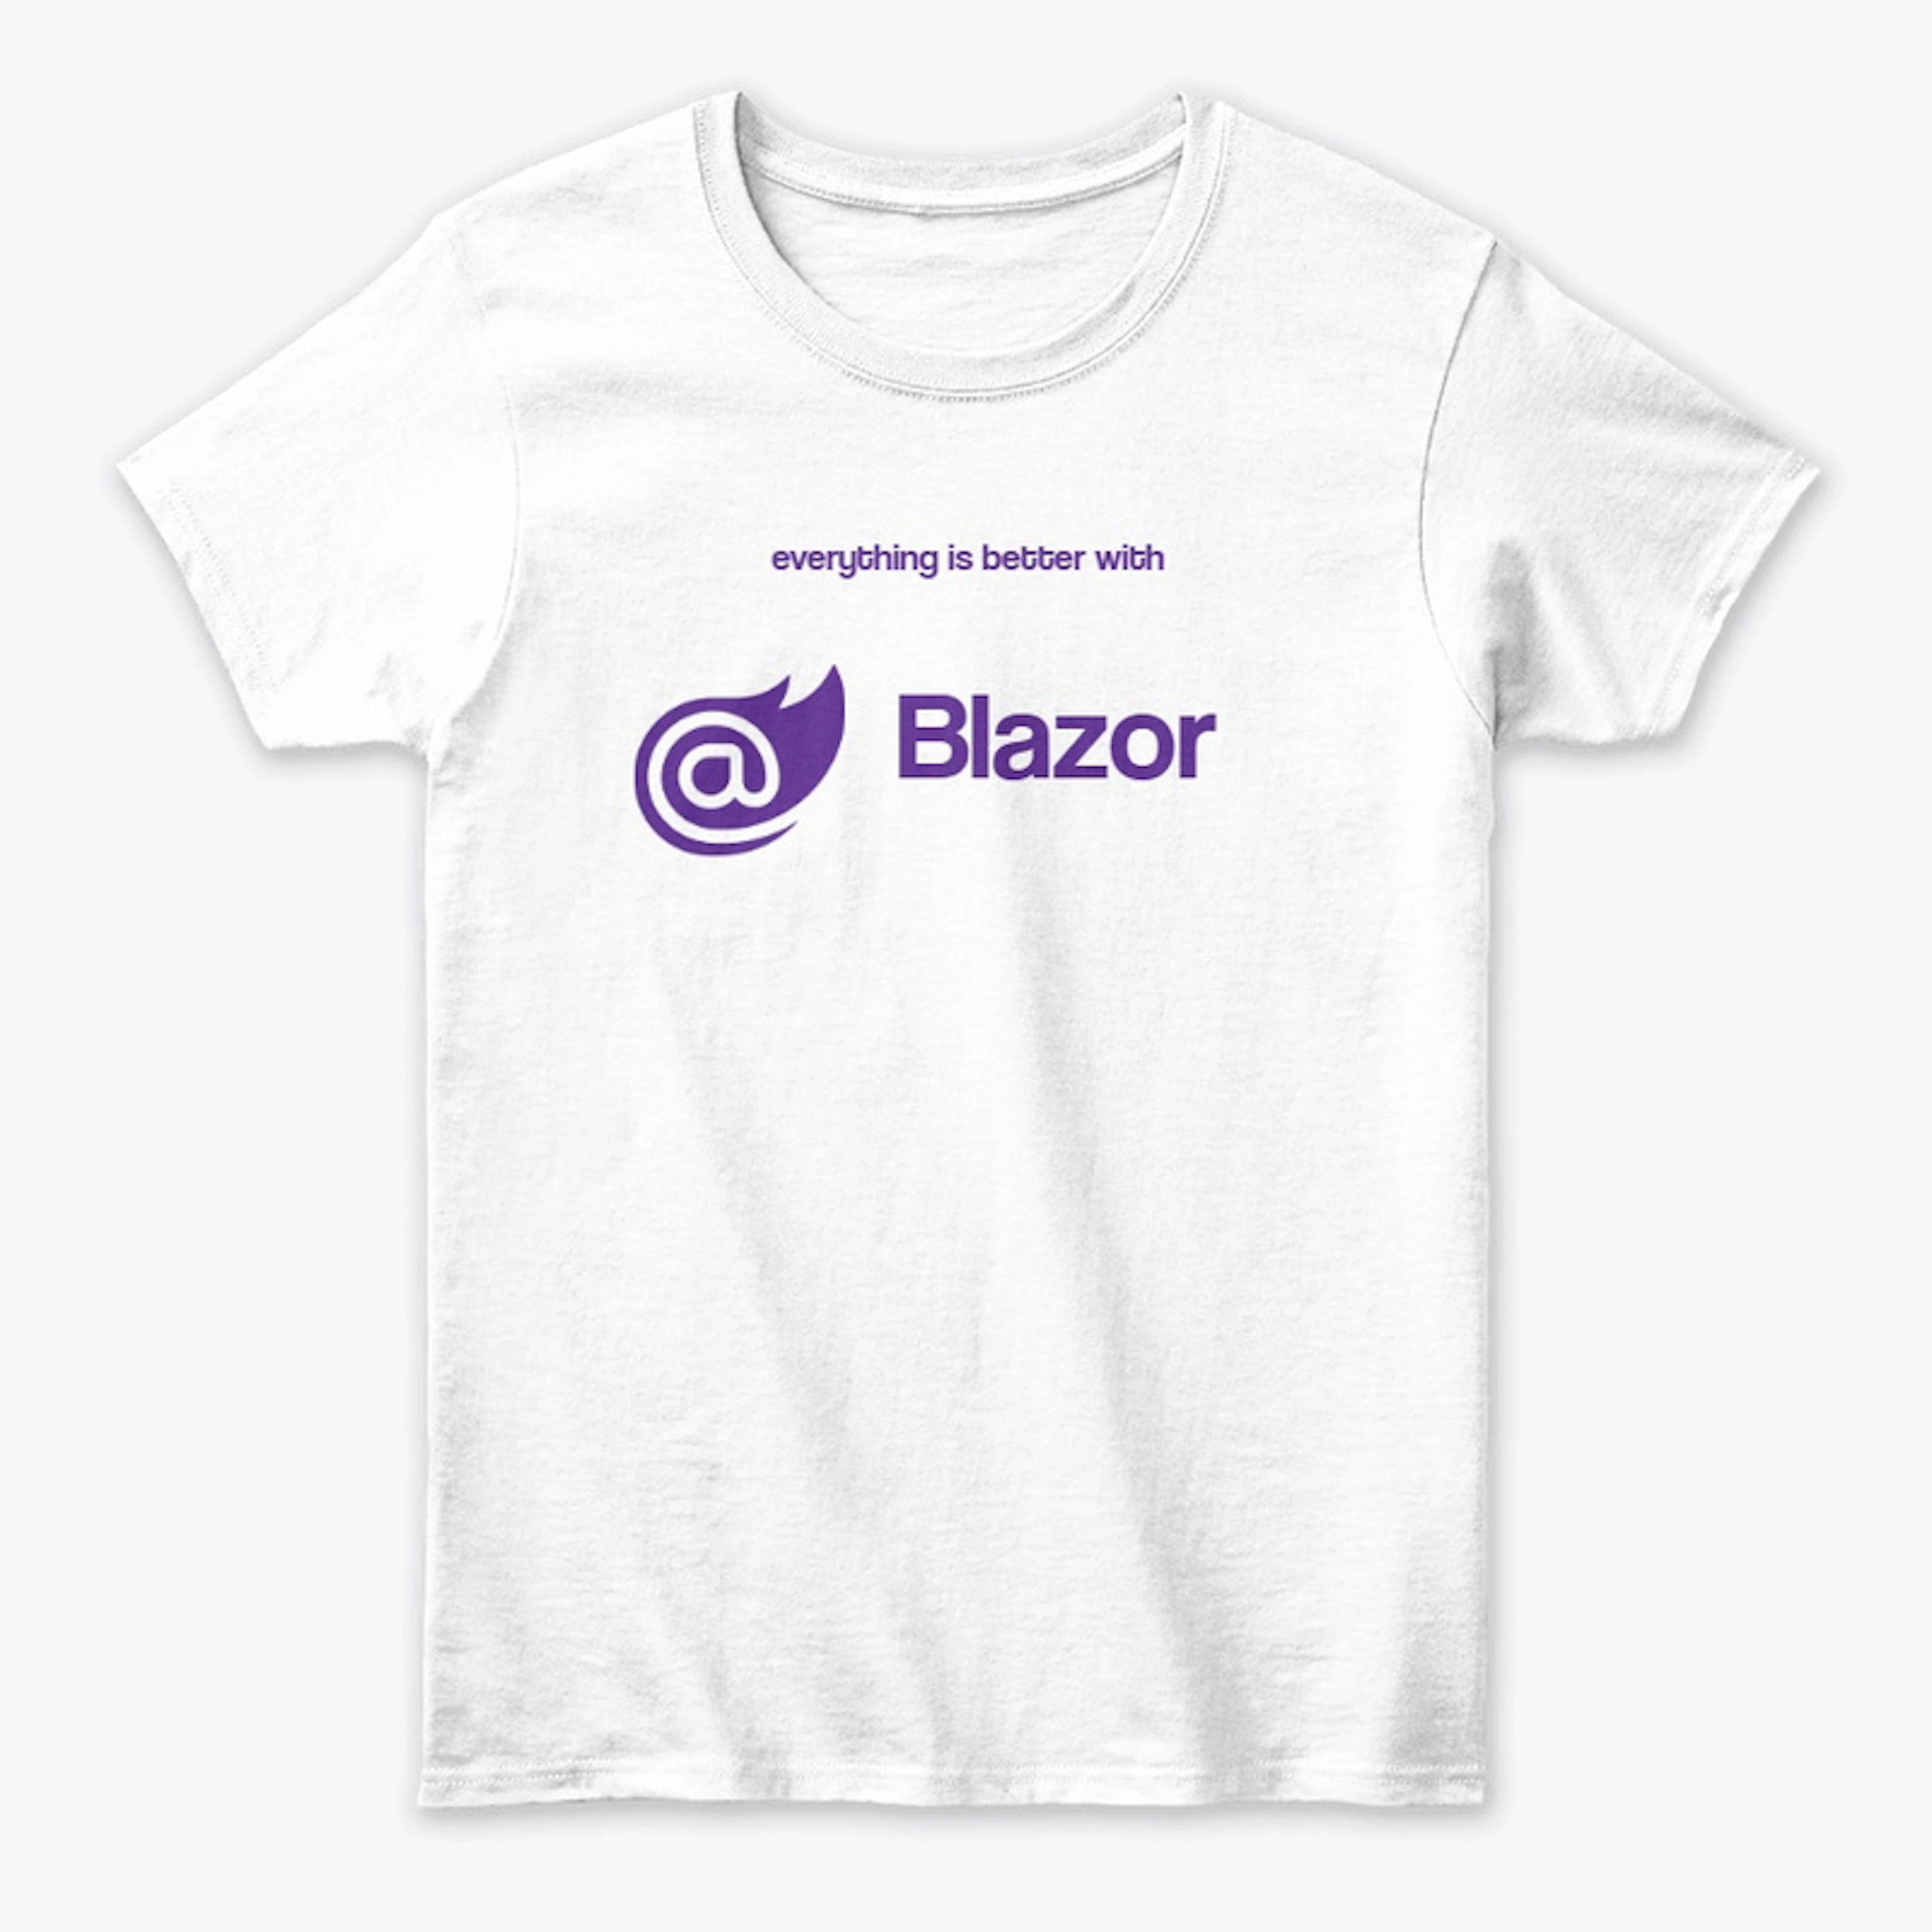 Everything is better with Blazor - Light